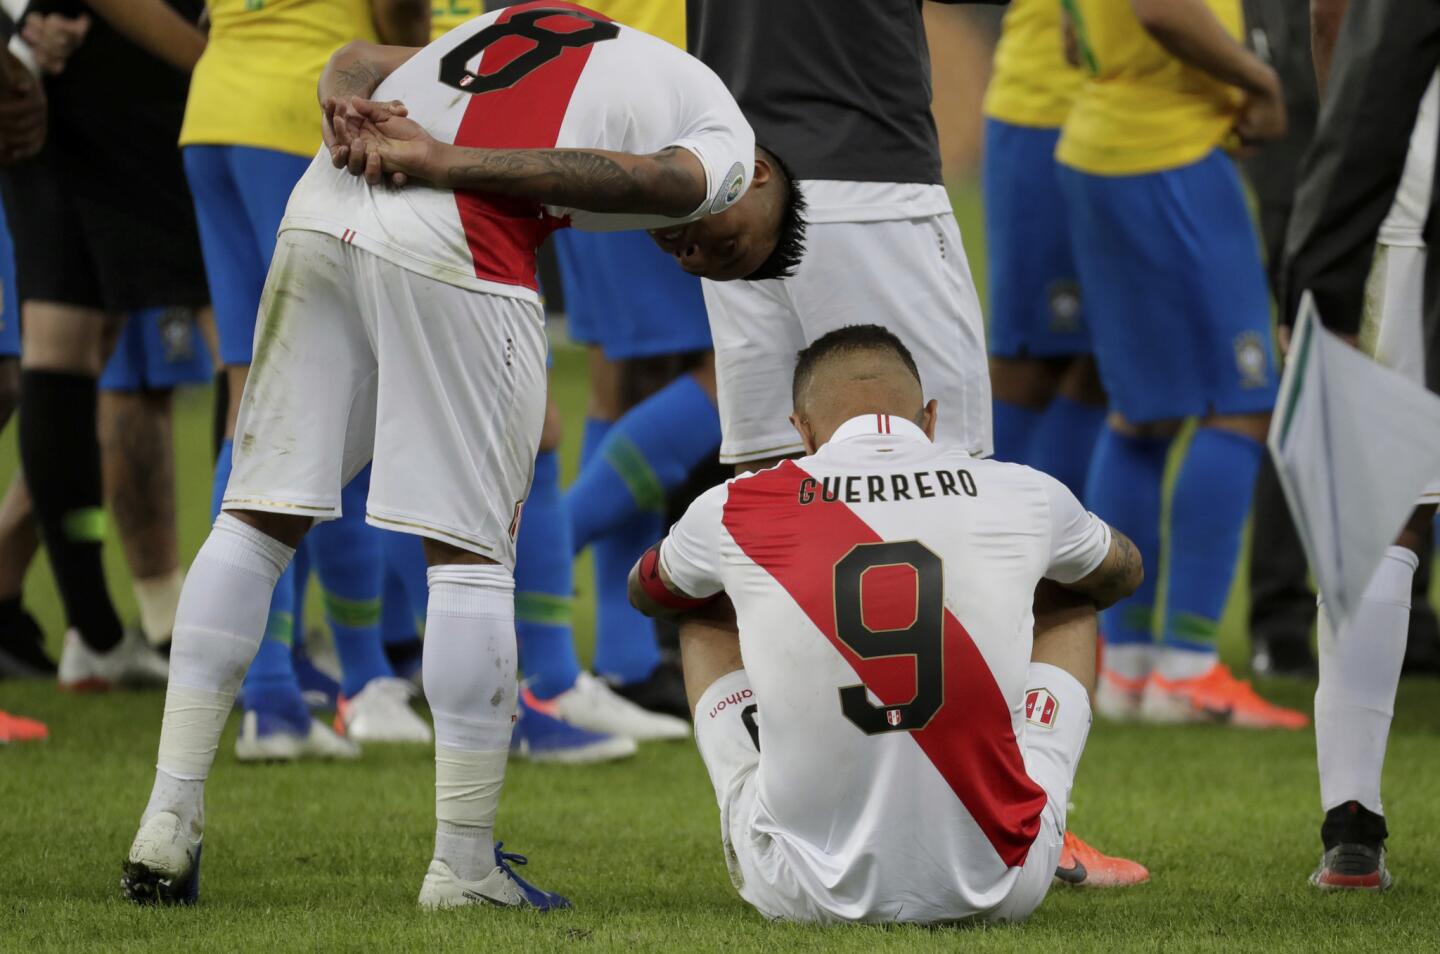 Peru's Christian Cueva, left, leans over to console Paolo Guerrero after losing the final Copa America soccer match to Brazil at Maracana stadium in Rio de Janeiro, Brazil, Sunday, July 7, 2019. Brazil won 3-1.